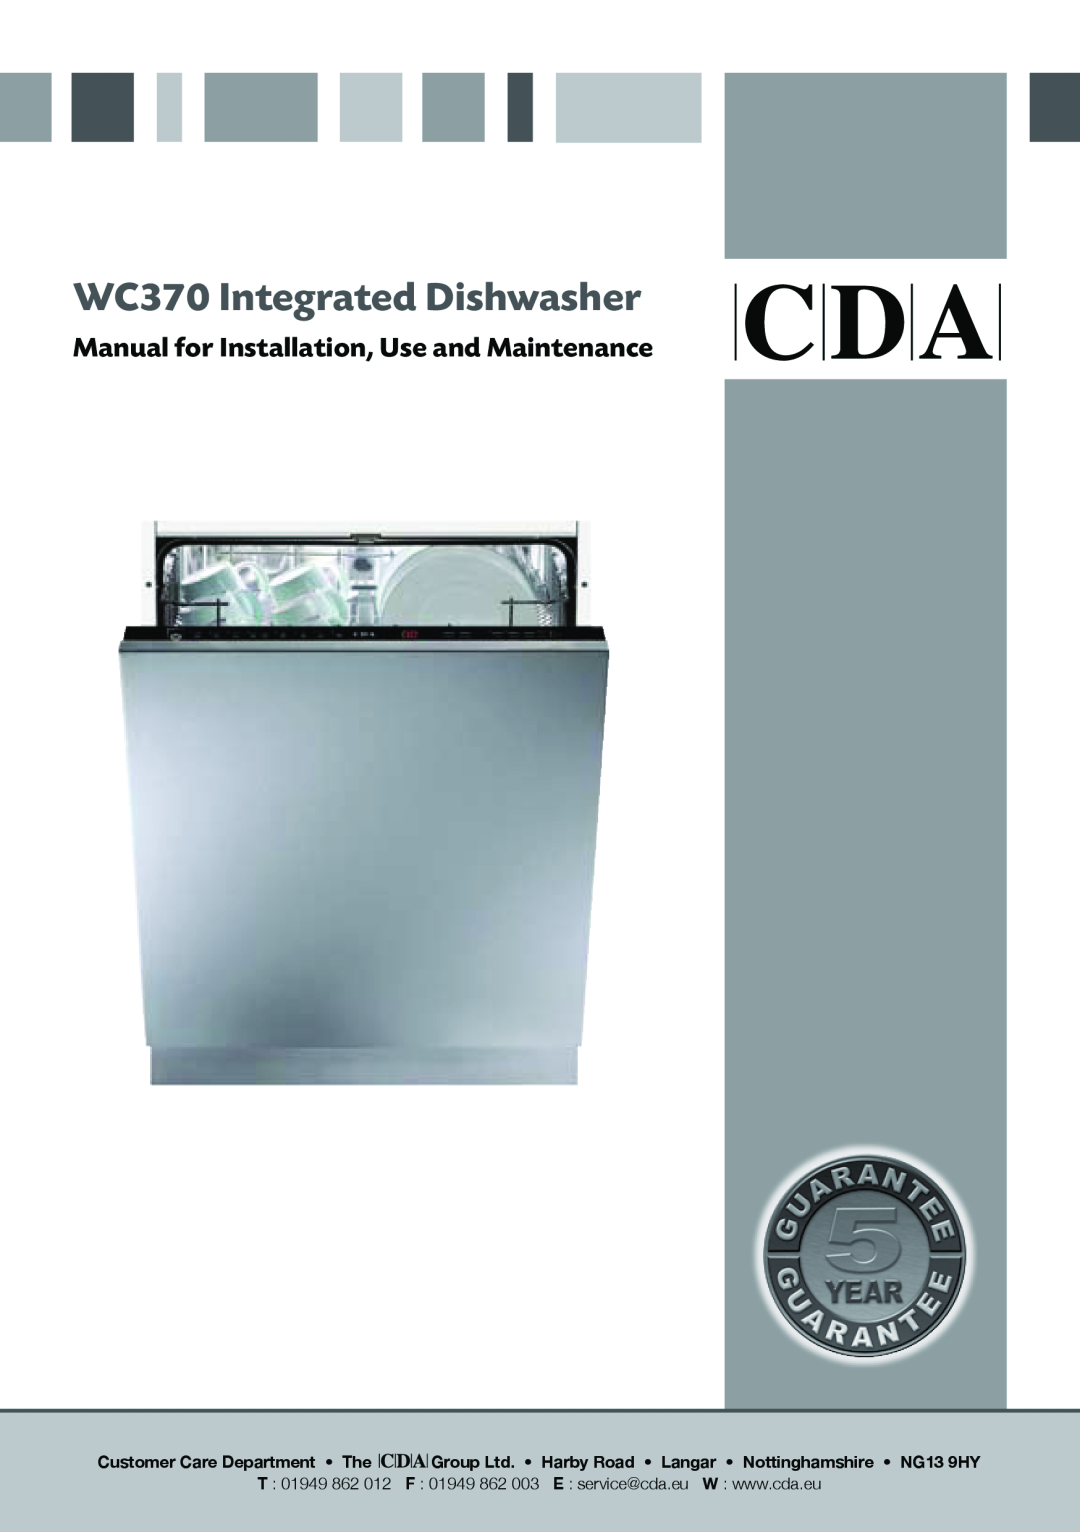 CDA manual WC370 Integrated Dishwasher, Manual for Installation, Use and Maintenance 